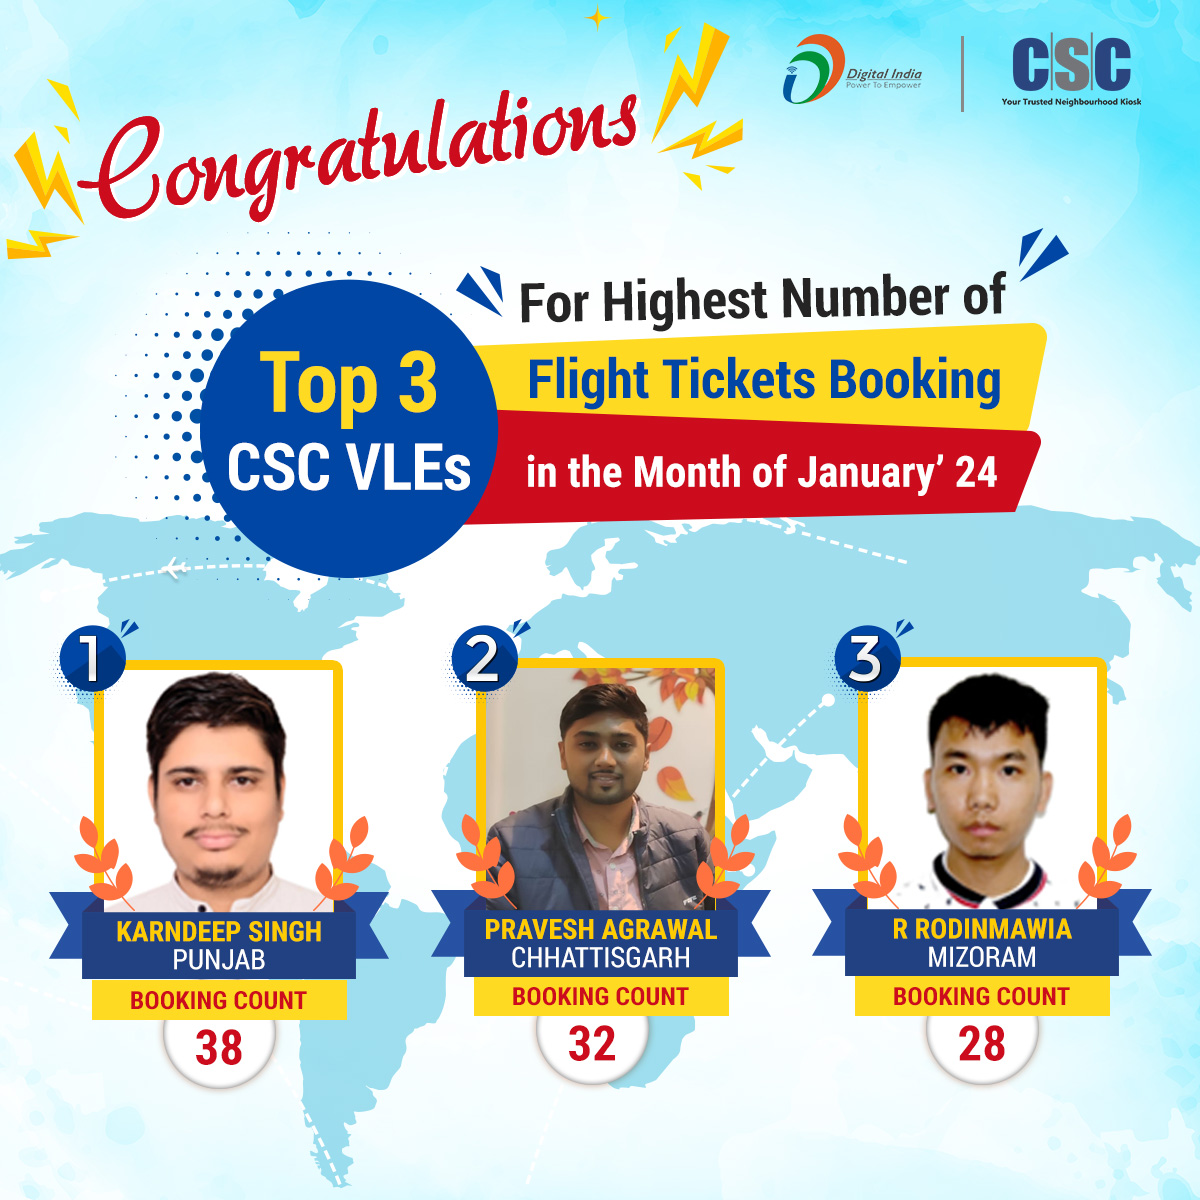 Happy to inform you!!

Congratulations to the Top 3 CSC VLEs for booking the highest number of Flight Tickets in January'24.

#cscsafar #csc #digitalindia #cscflightbooking #flightbooking #flightservices #flighttickets